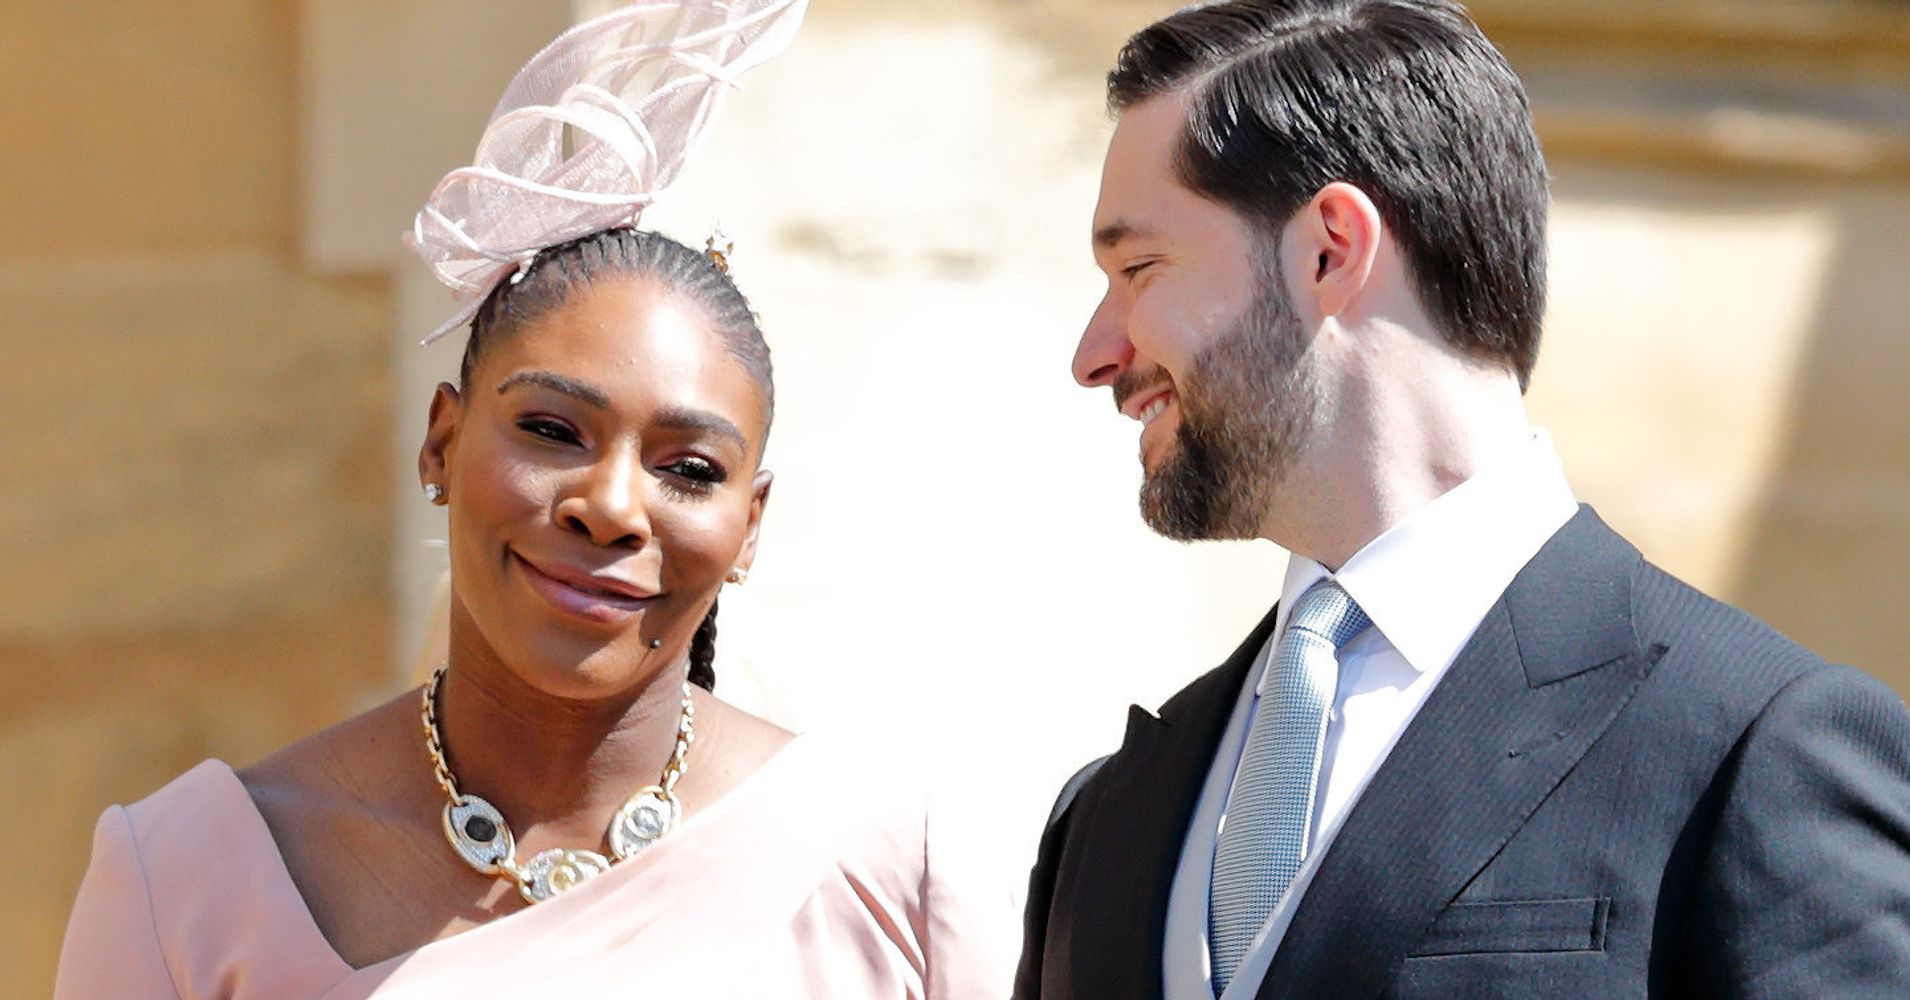 Alexis Ohanian's Video Tribute To Wife Serena Williams Is A Real Tearjerker | HuffPost